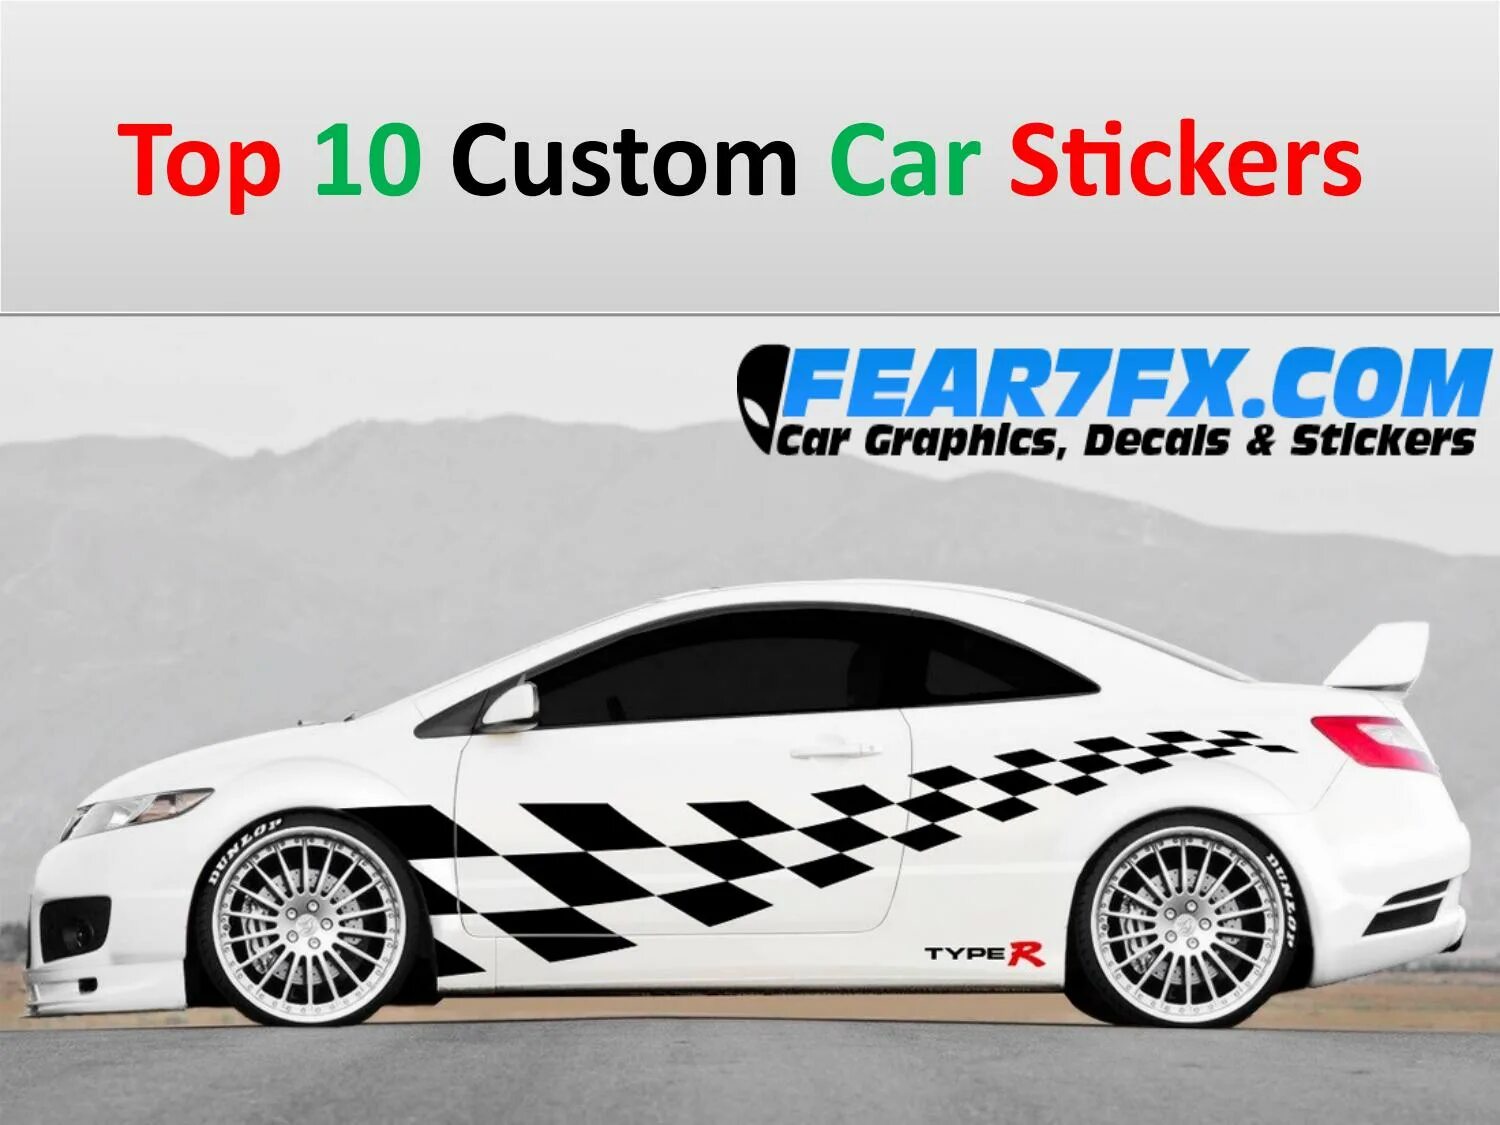 Cars graphics. Car Sticker. Кар Графикс. Style car Sticker. Palette Sticker for cars.